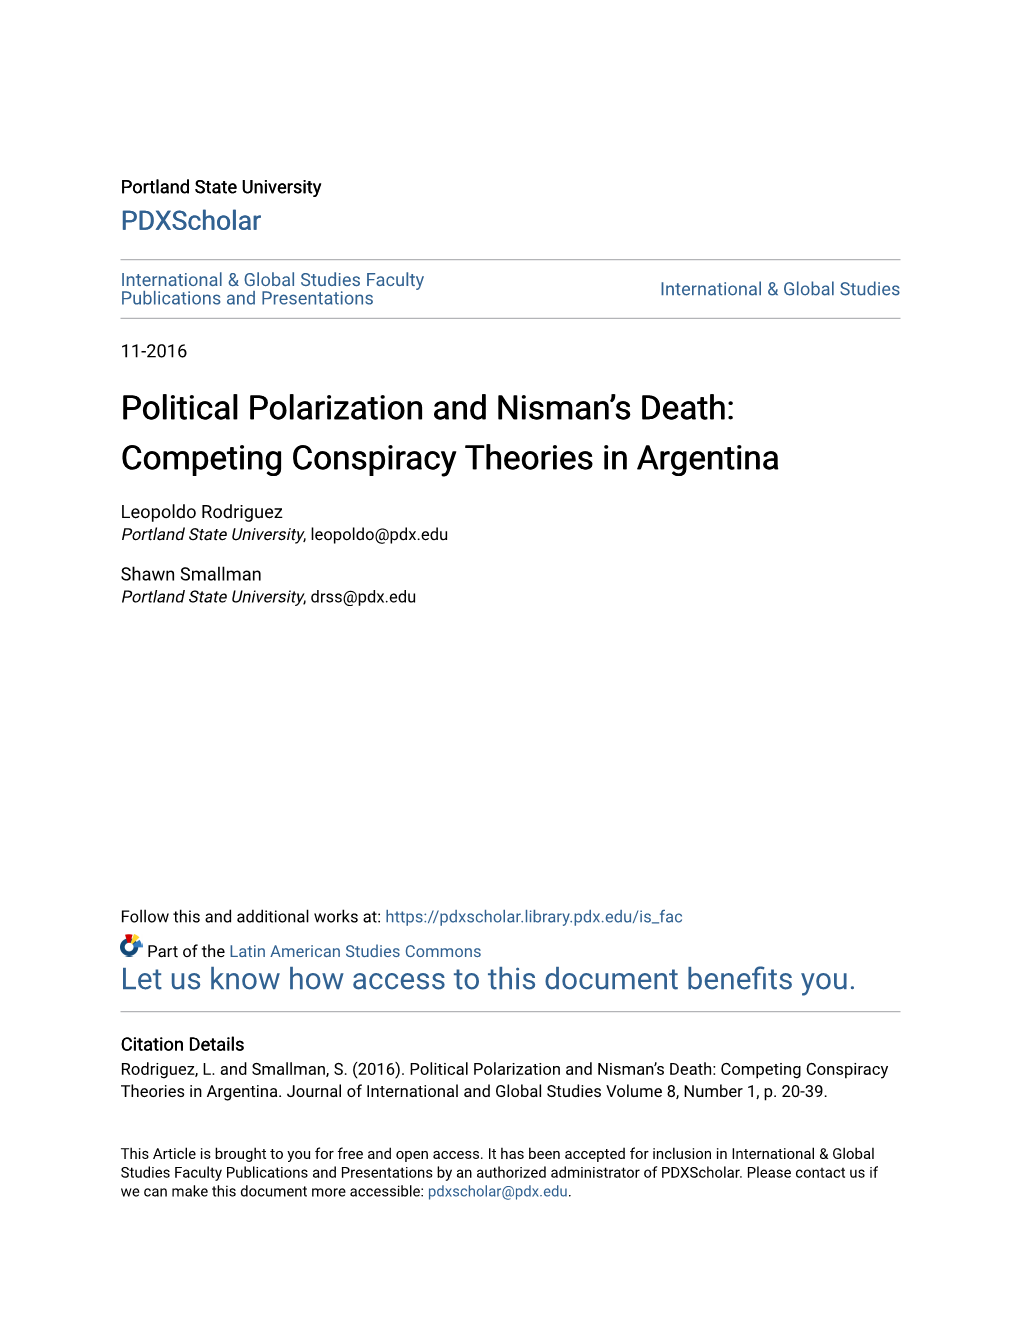 Competing Conspiracy Theories in Argentina